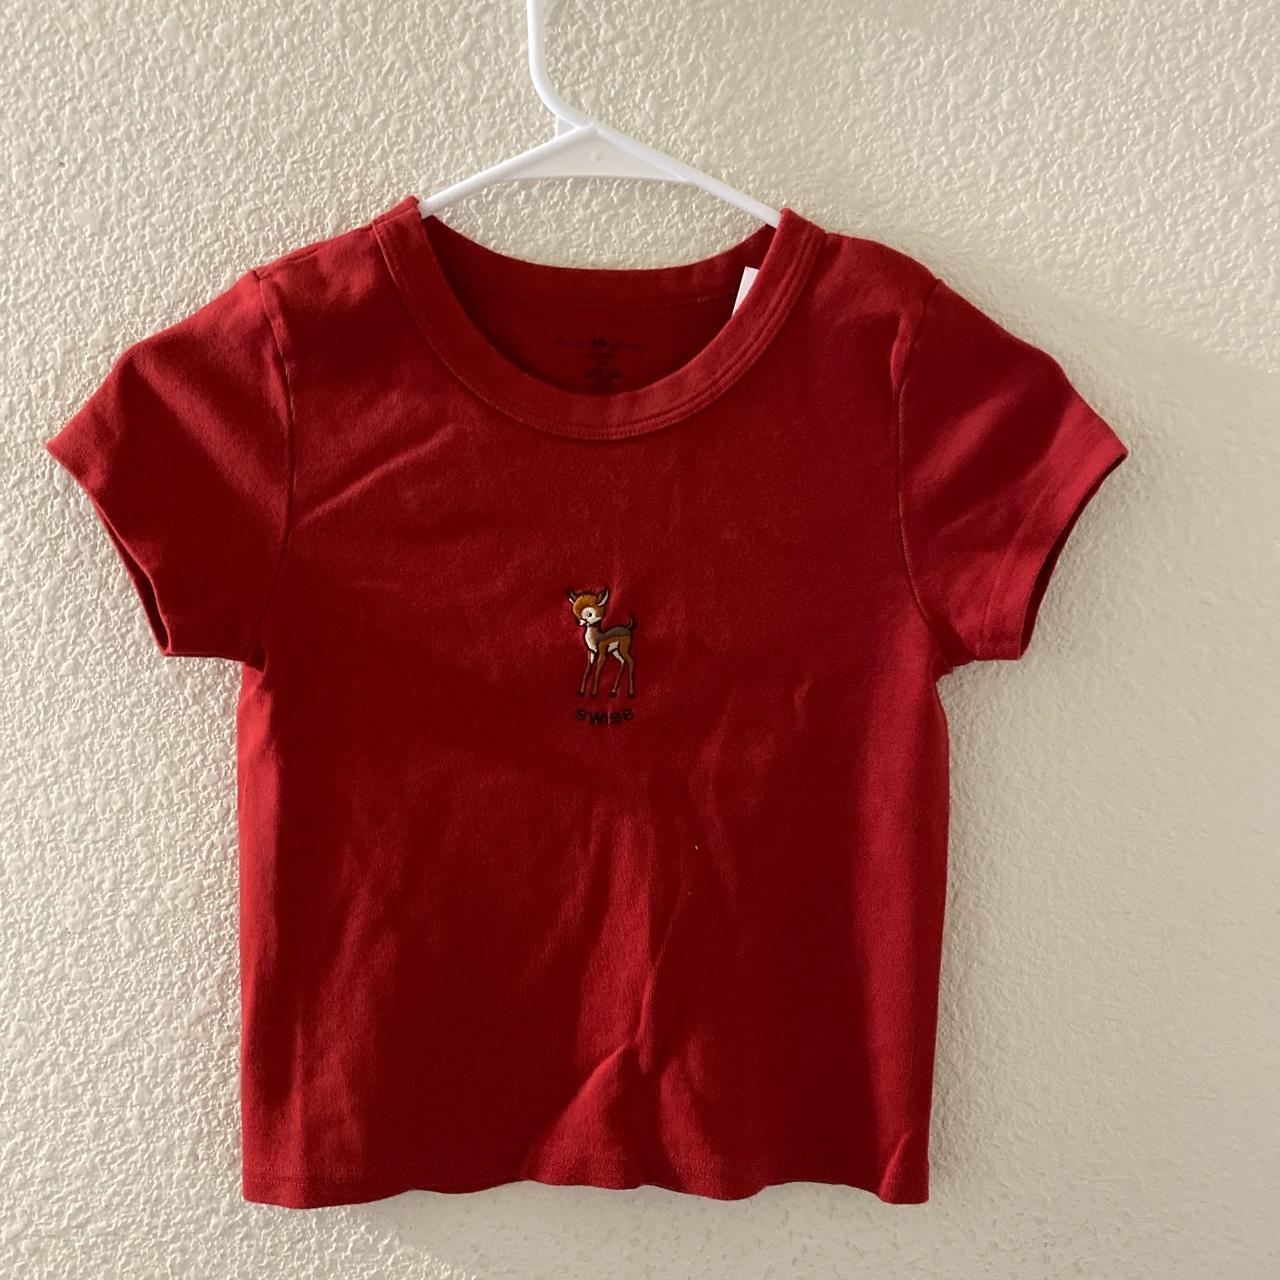 Brandy Melville Ashlyn Top(Red), Women's Fashion, Tops, Other Tops